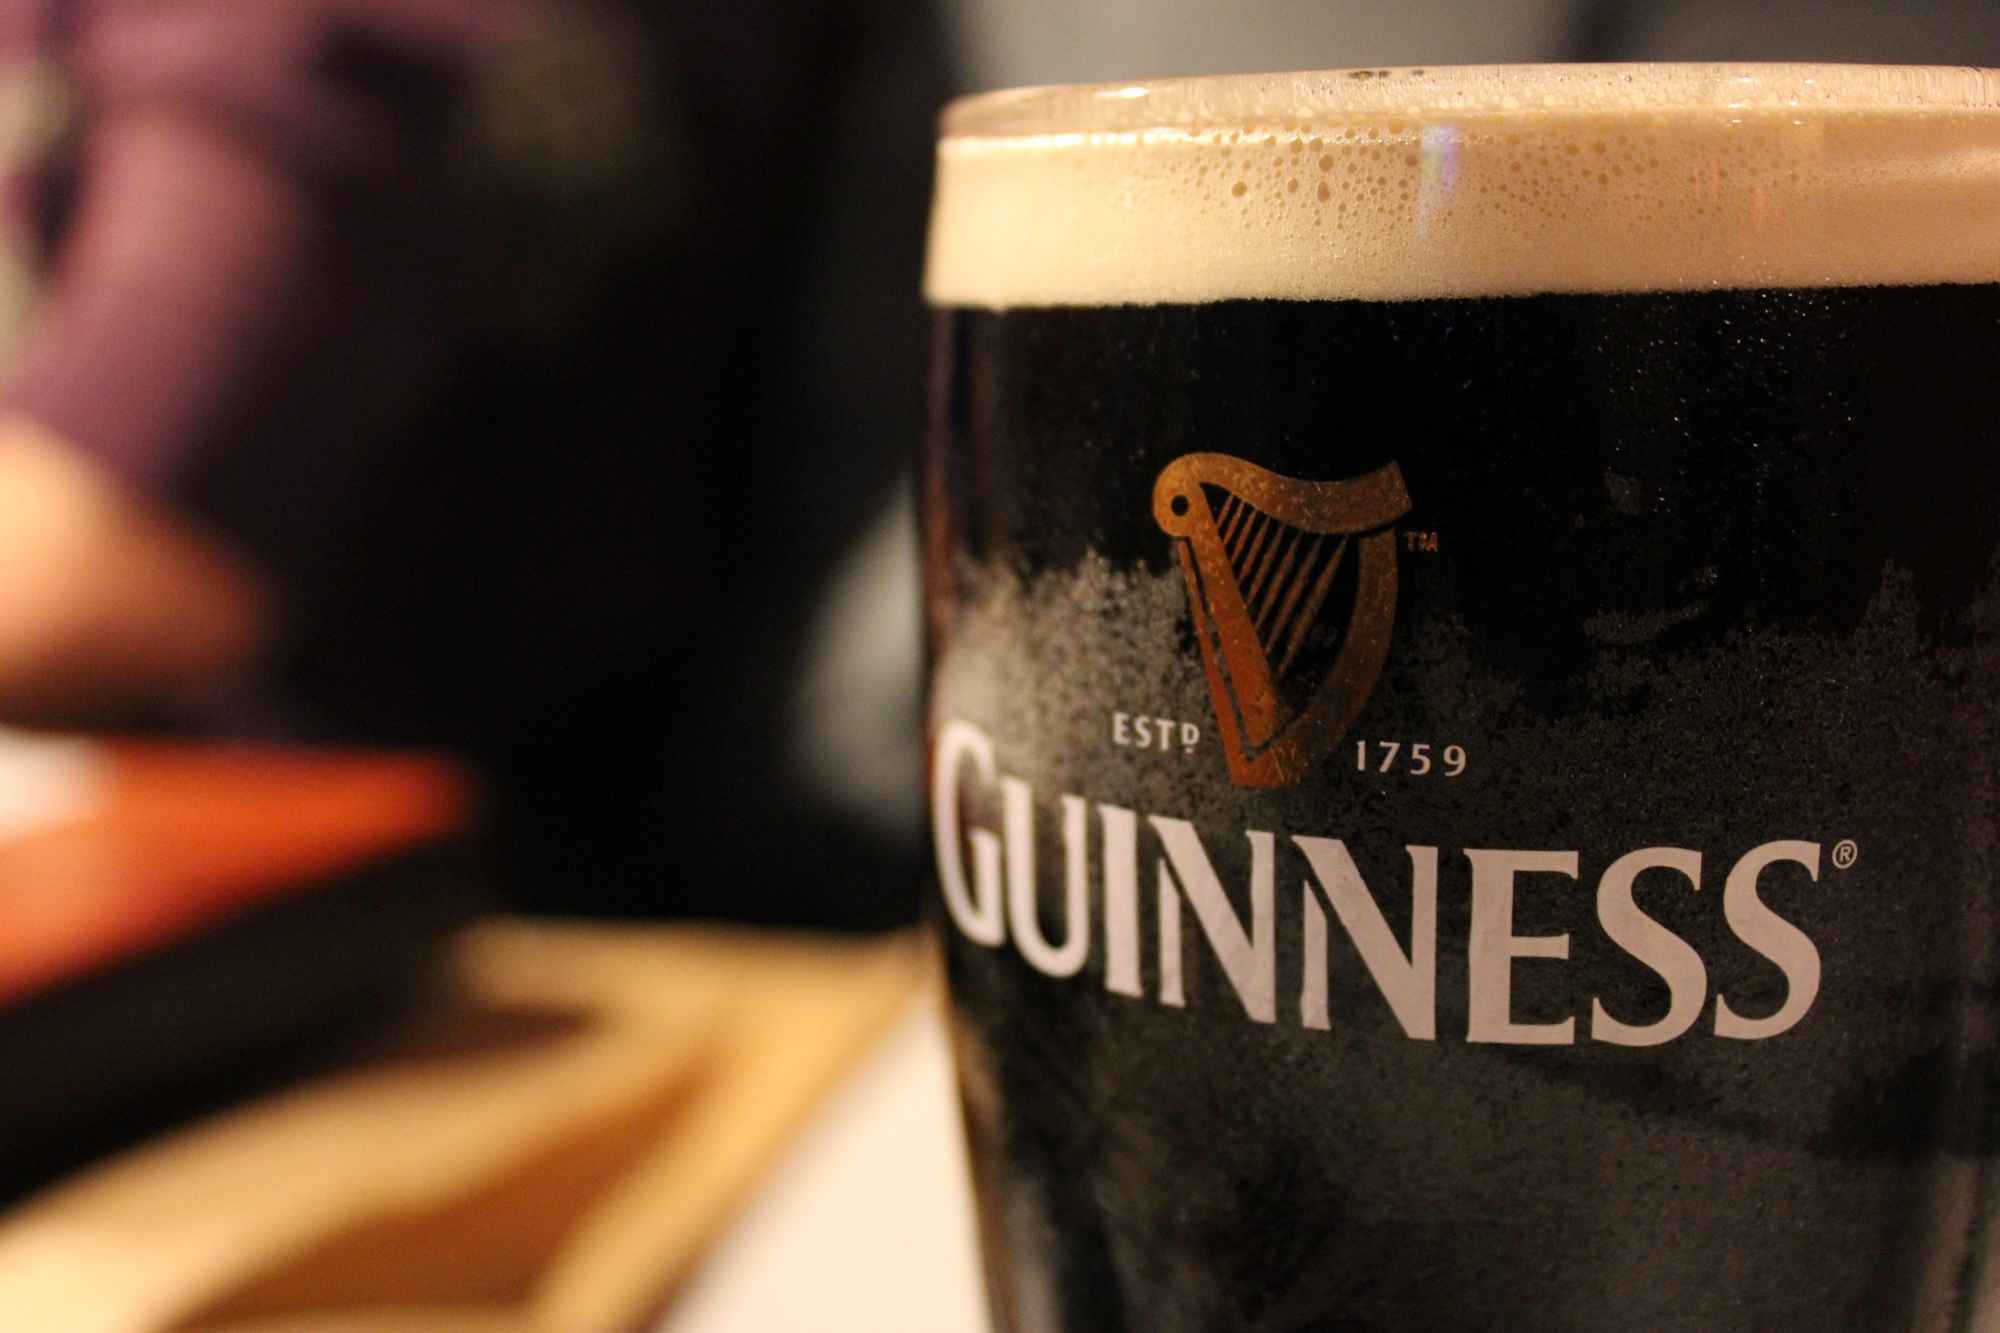 12-things-you-didn-t-know-about-guinness-huffpost